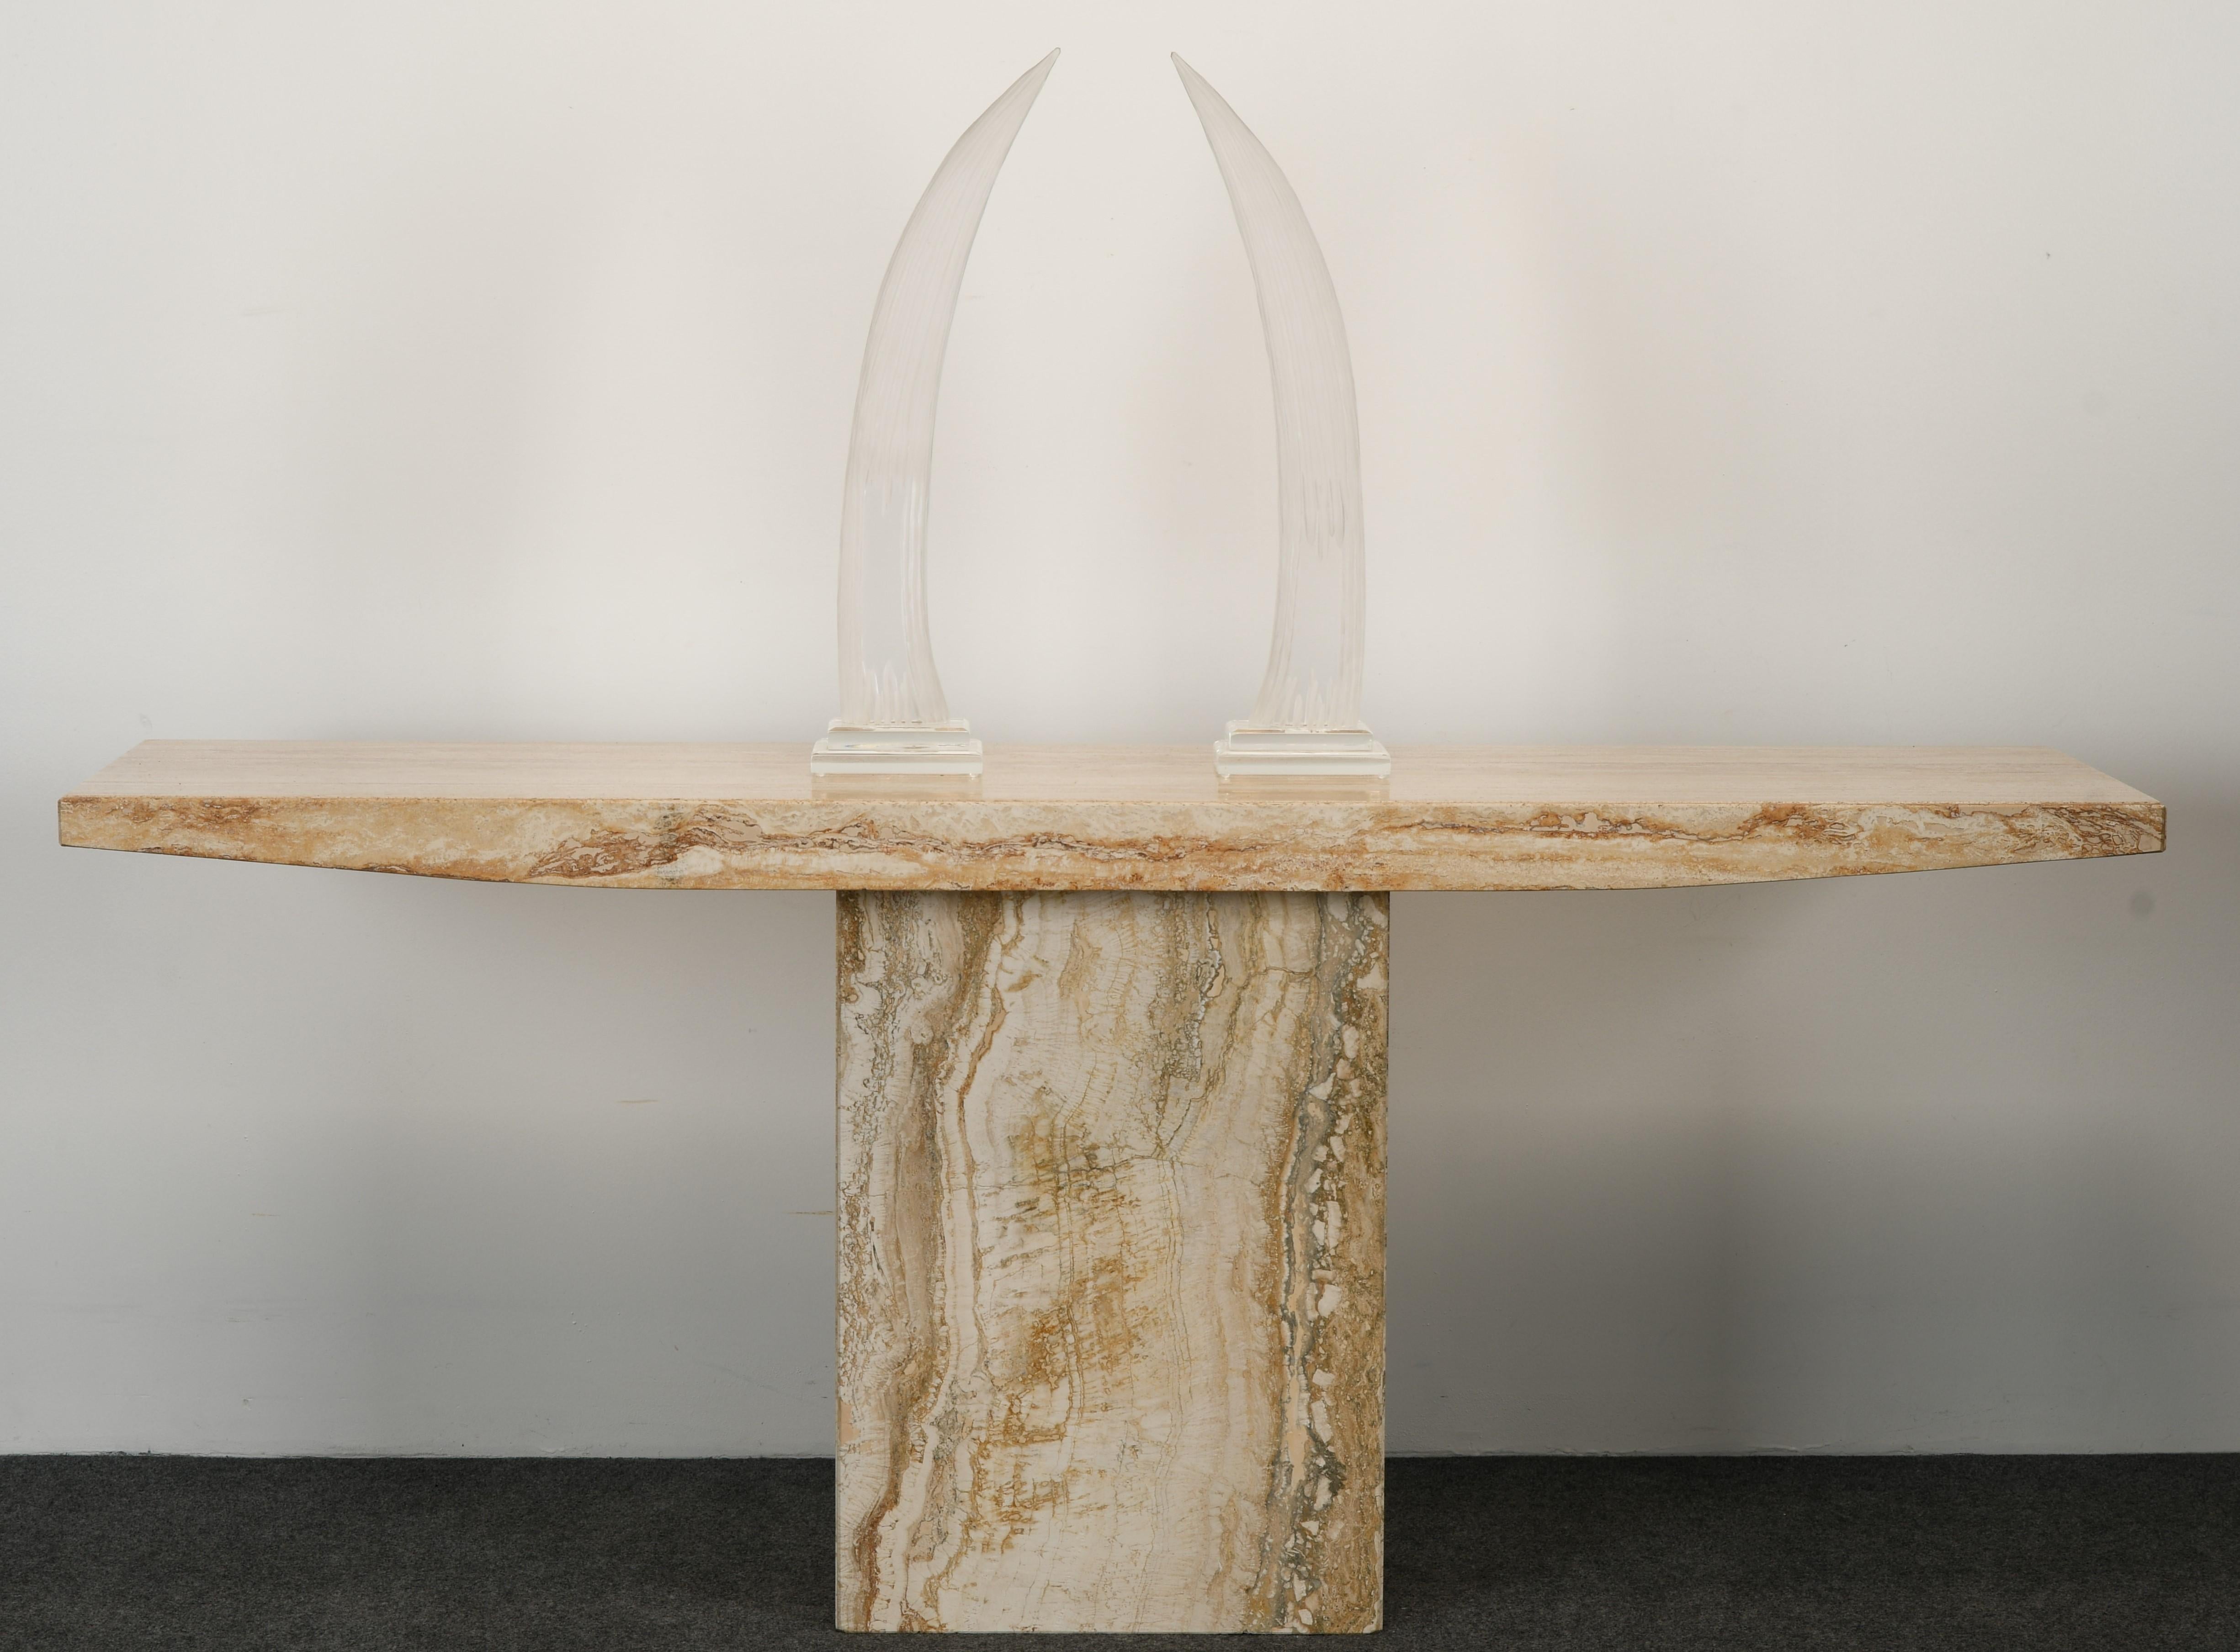 An impressive pair of decorative acrylic or Lucite tusks by Van Teal. These tusks would work well on a decorative console table or mantel (fireplace). They have great form and substantial size. Signed on top of base 